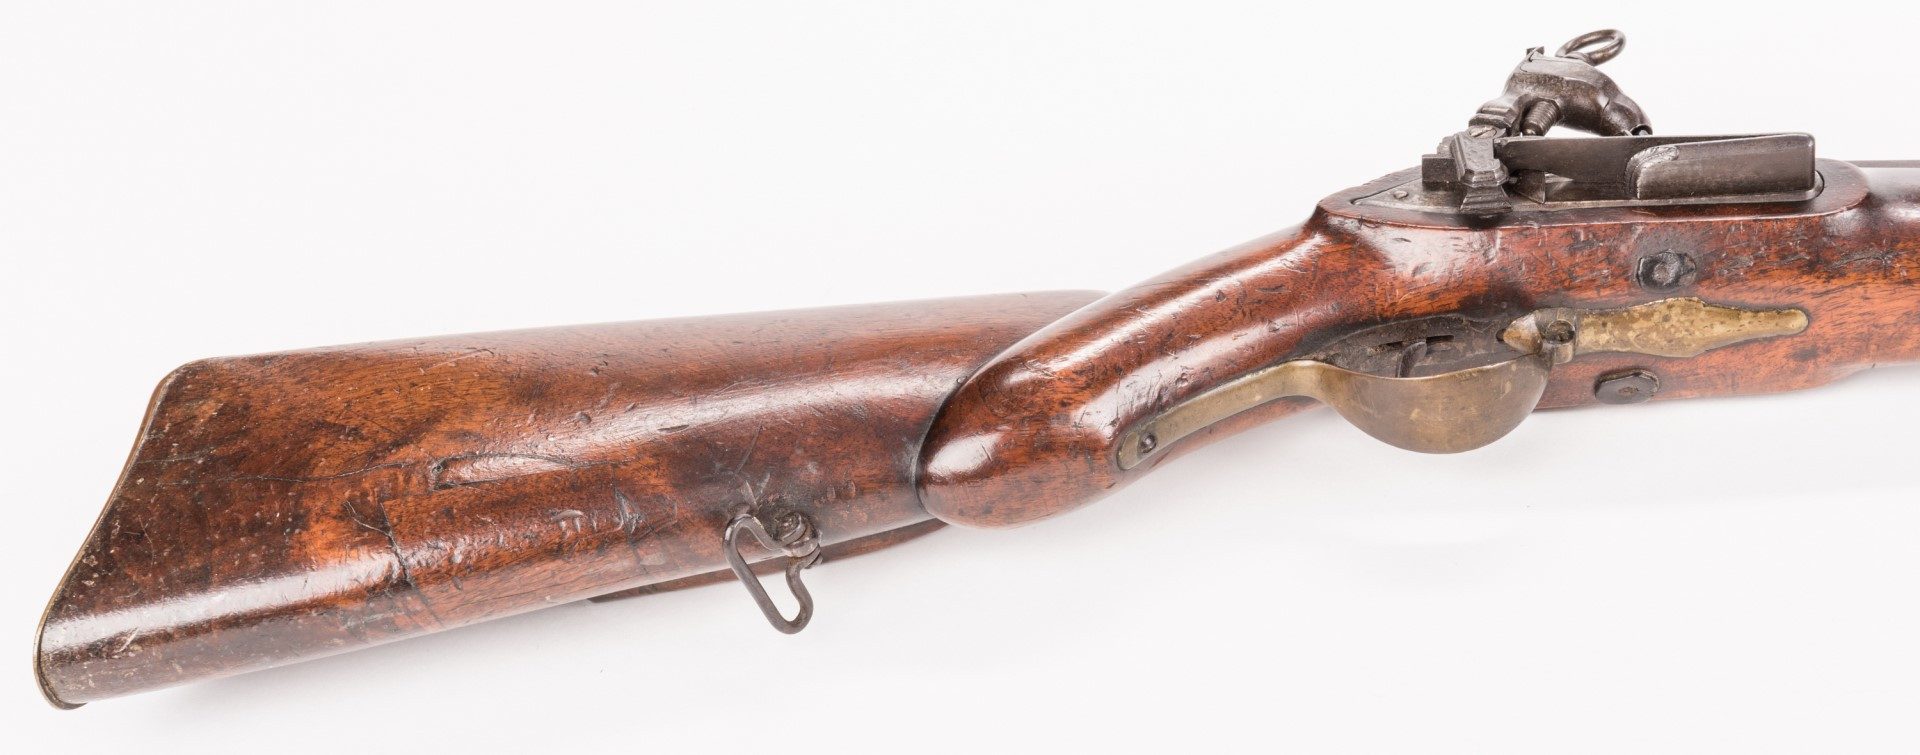 Lot 797: Spanish Miquelet Wall or Rampart Musket